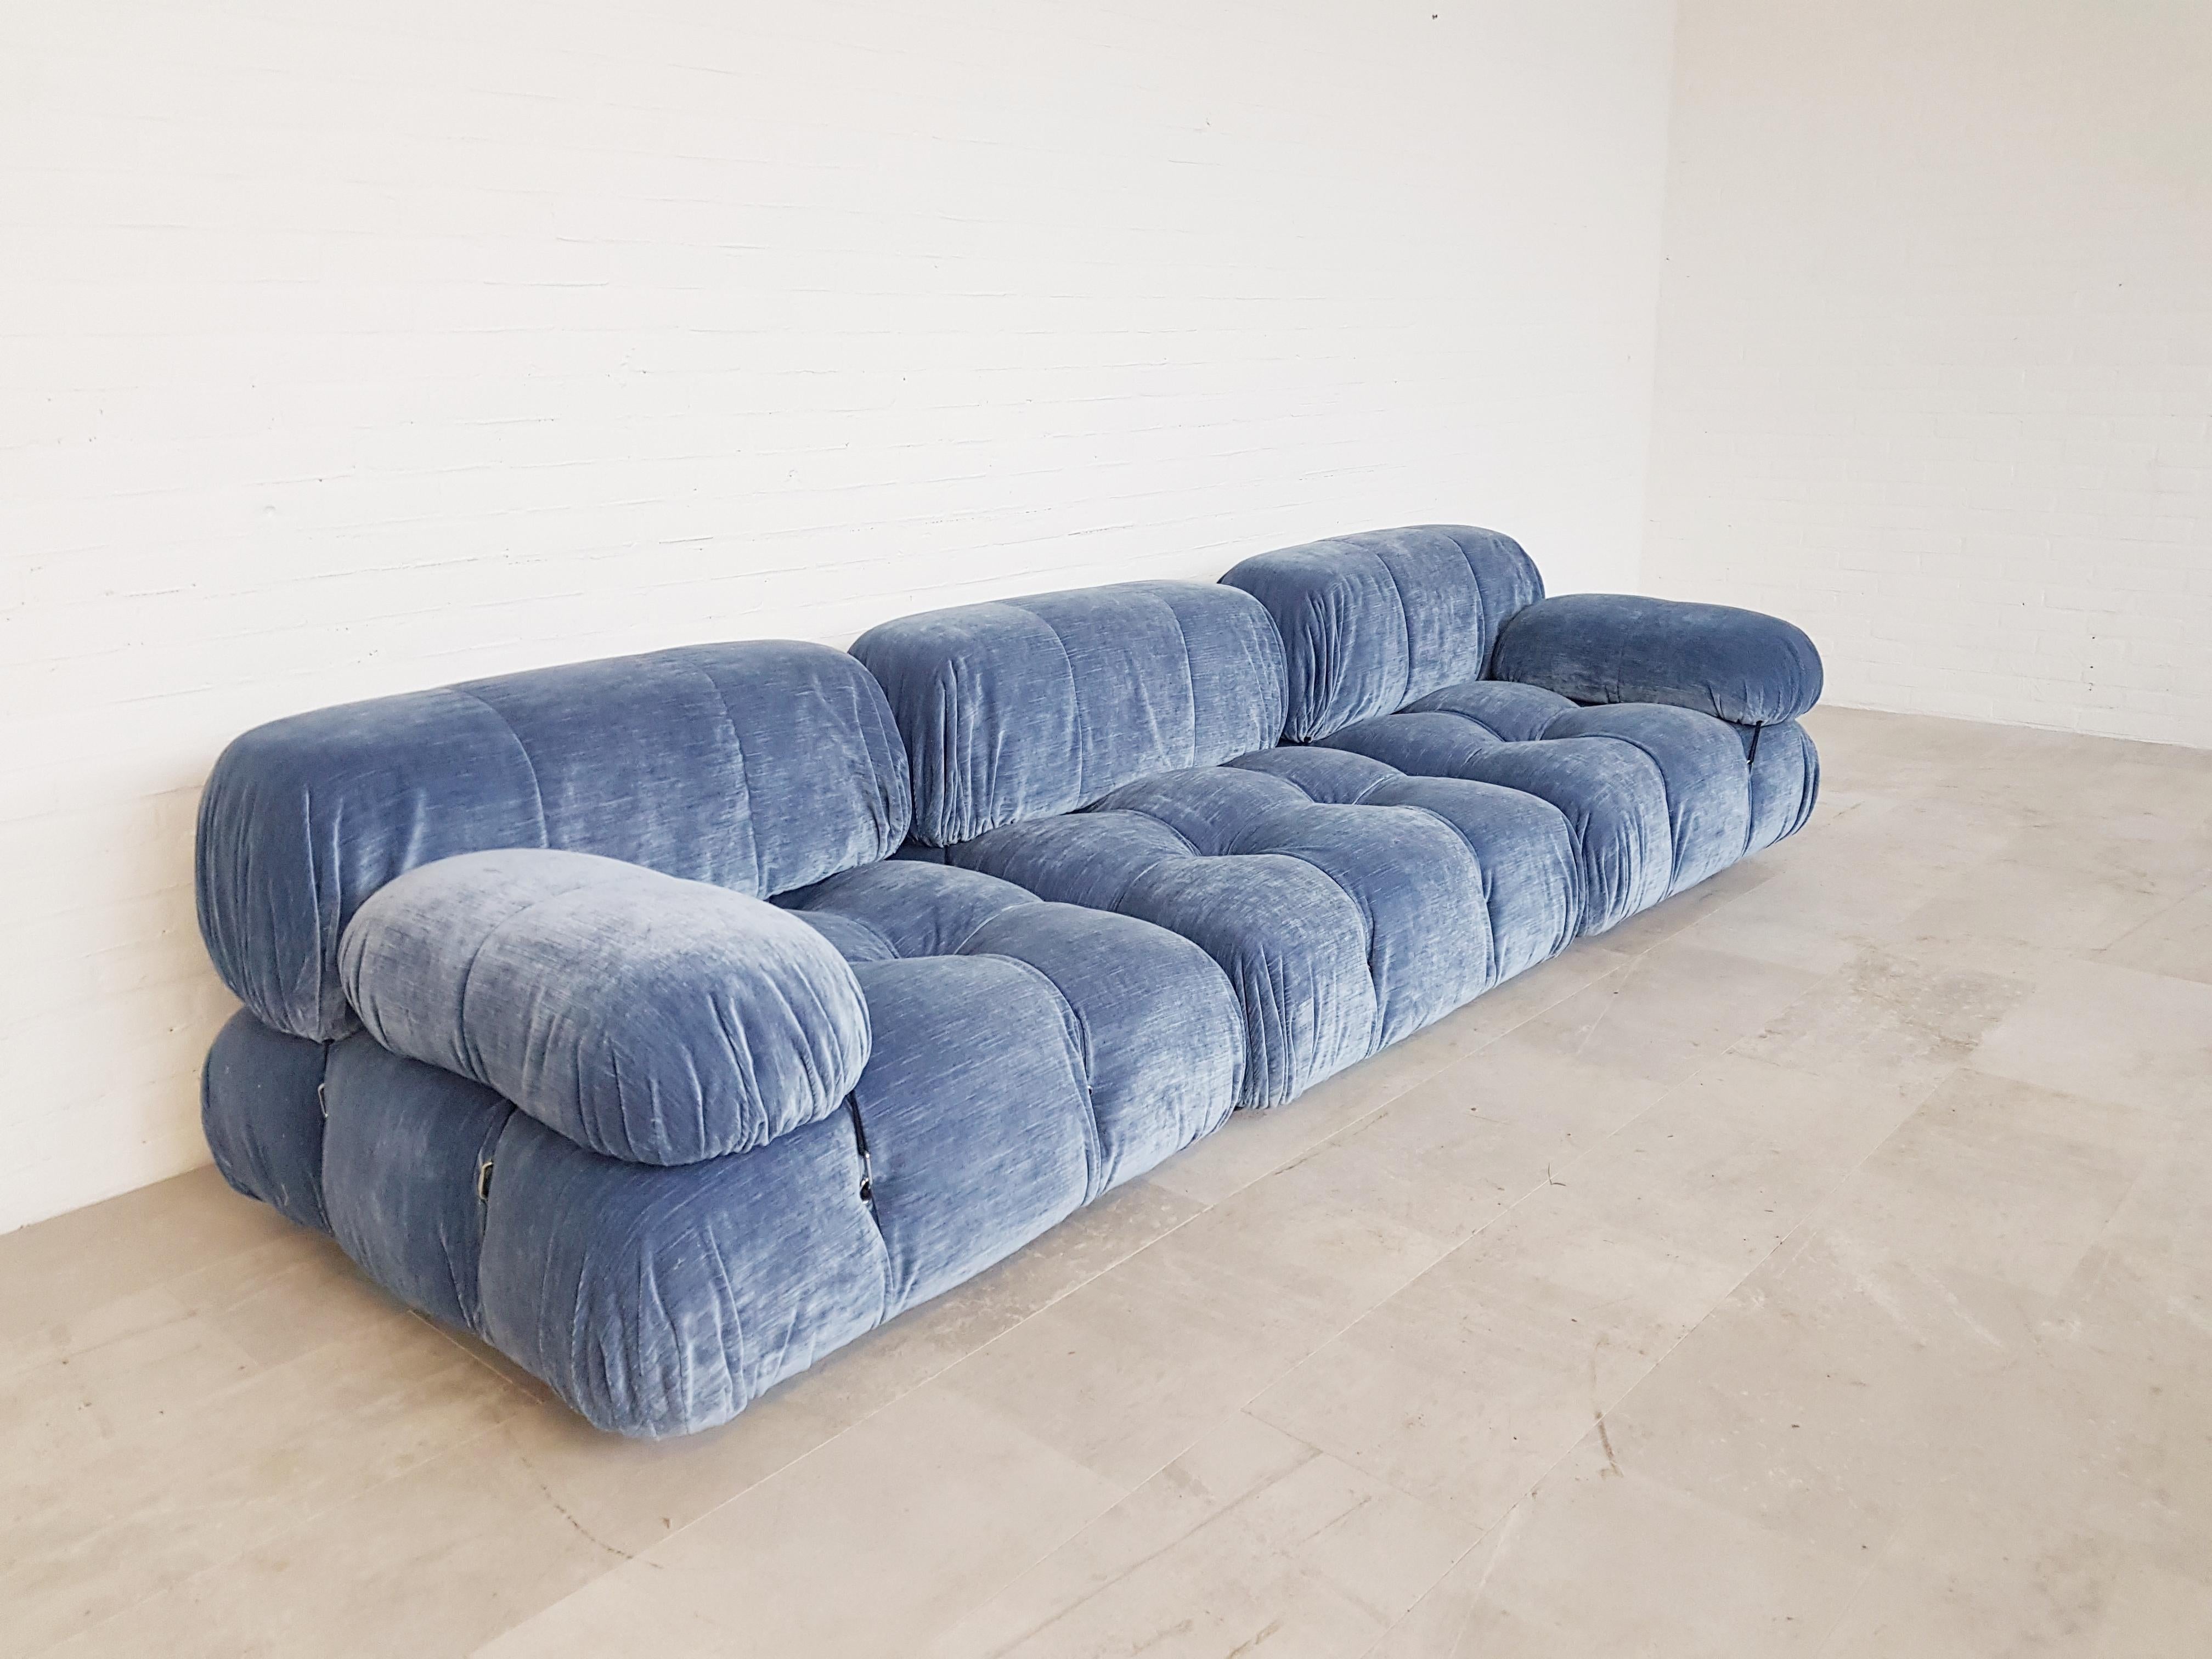 Mario Bellini designed this amazing modular sectional sofa for C&B Italia.
These elements have been reupholstered in blue velvet.

We have more original elements in store, so do reach out if you like to create your perfect combination in your